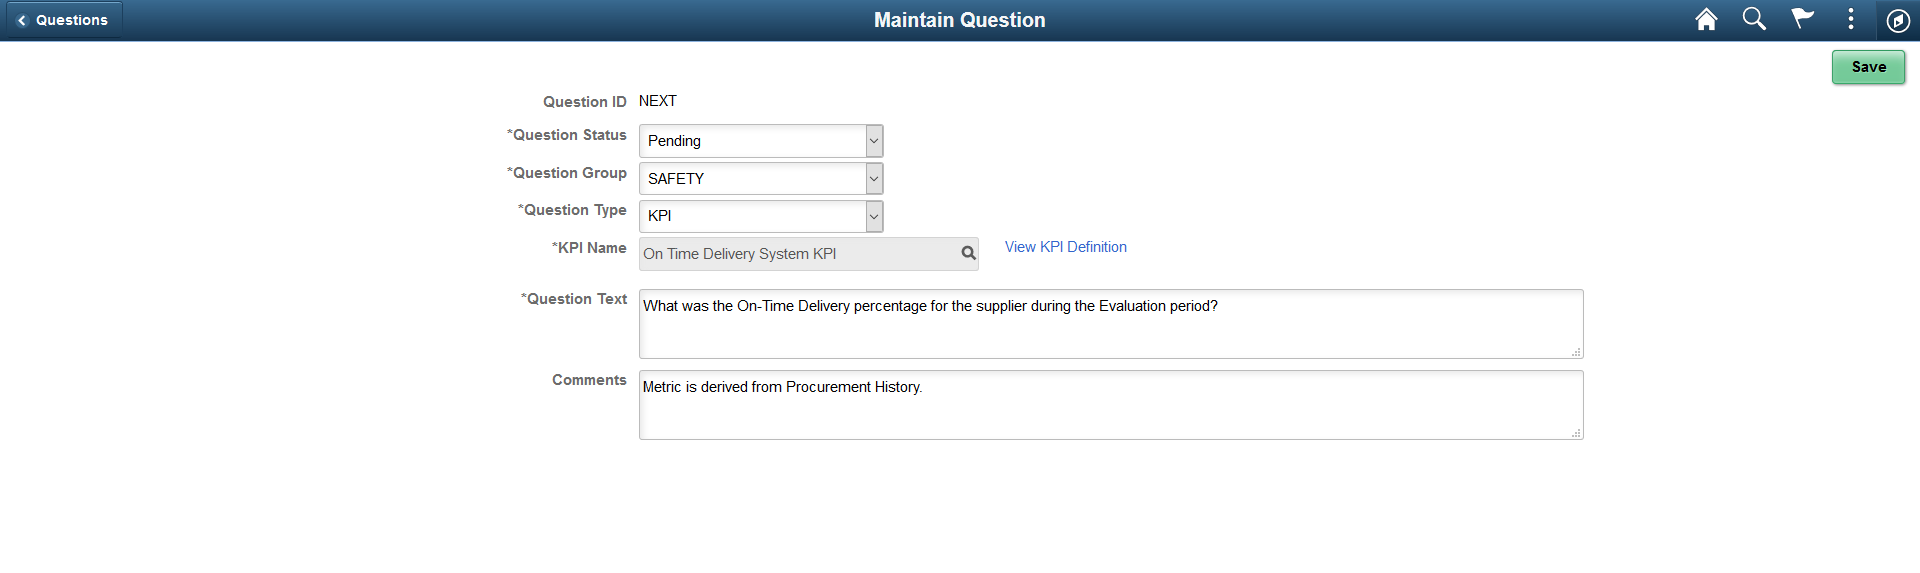 Maintain Question page